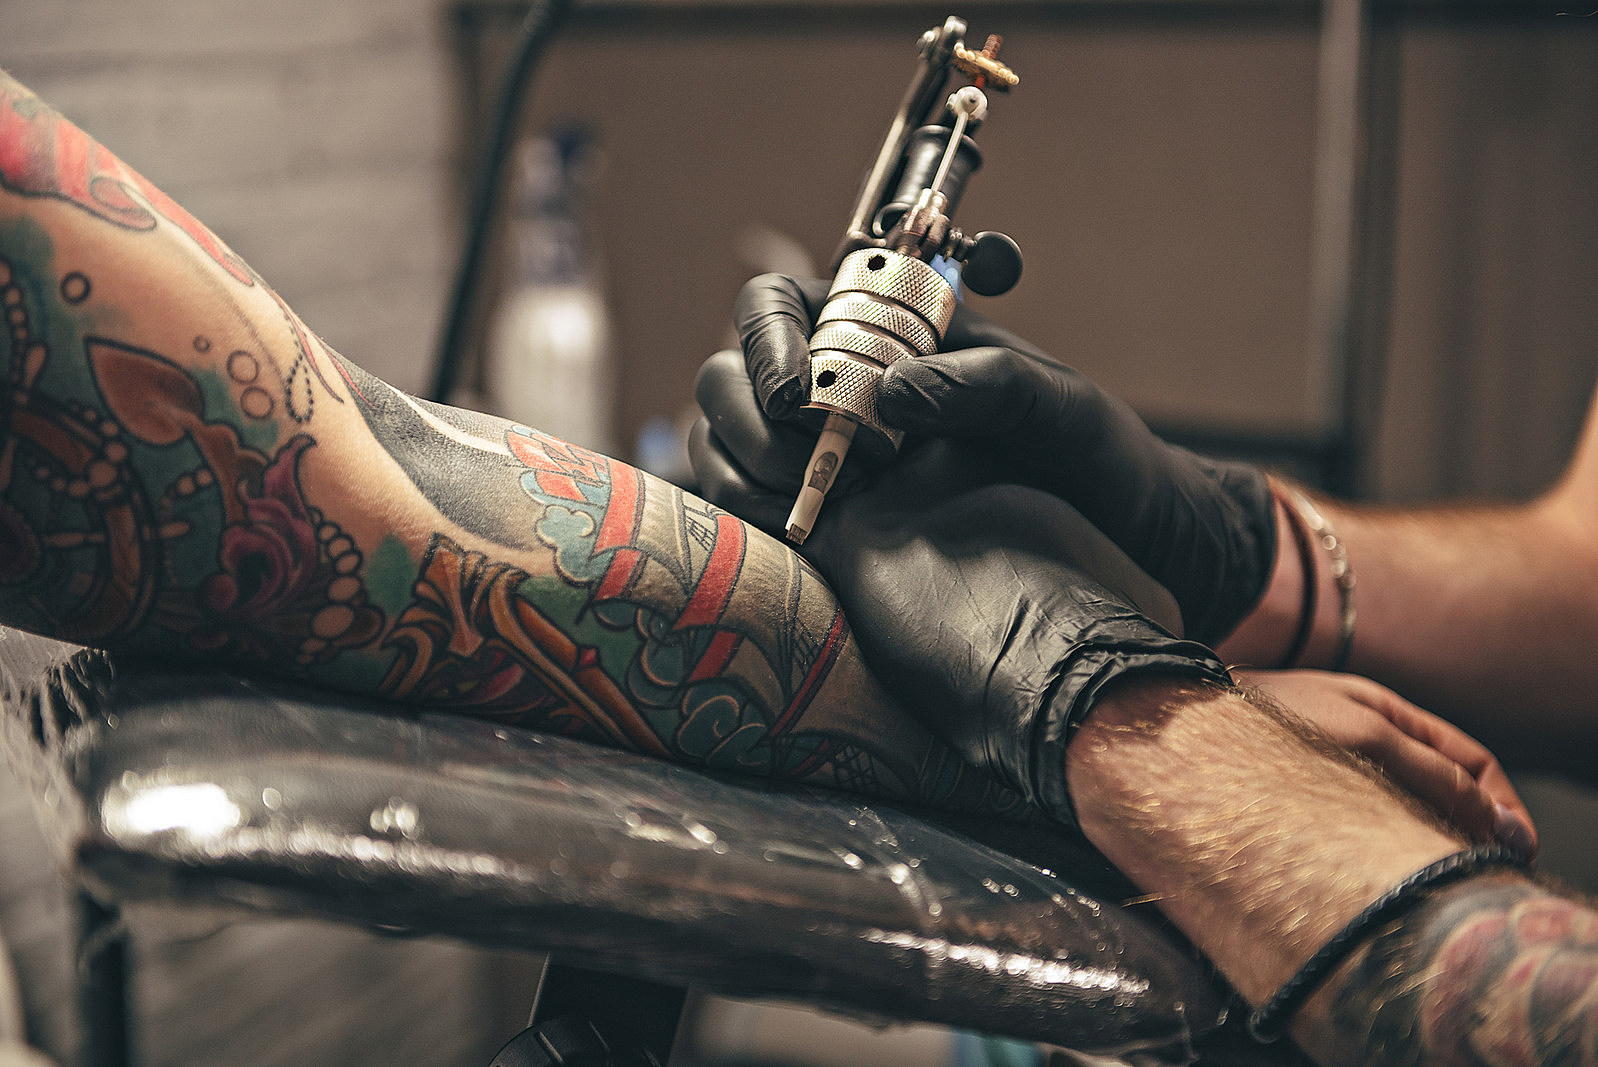 LIST Friday the 13th tattoo specials in the Birmingham area